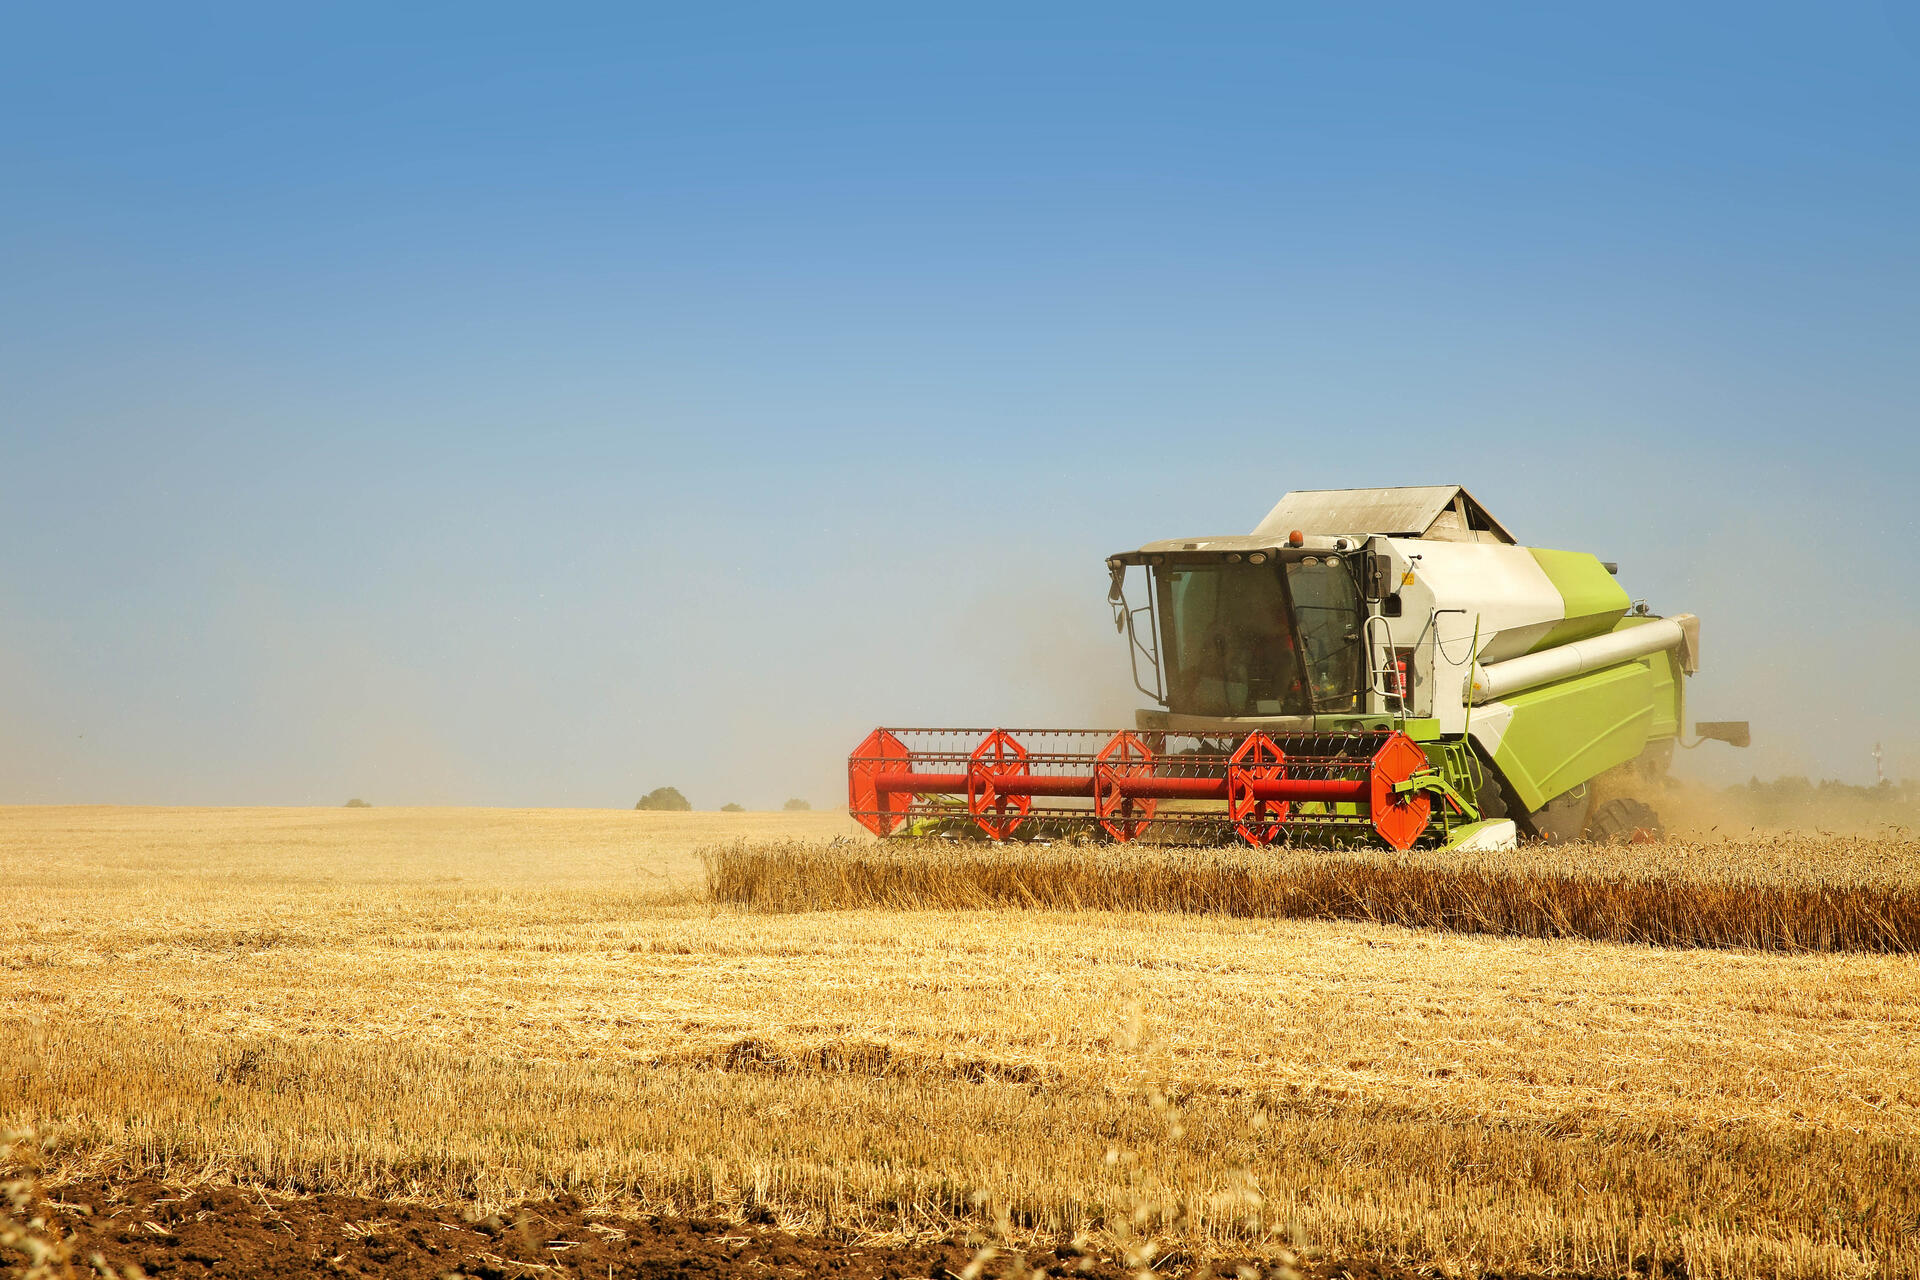 Claas combine harvester in the wheat field